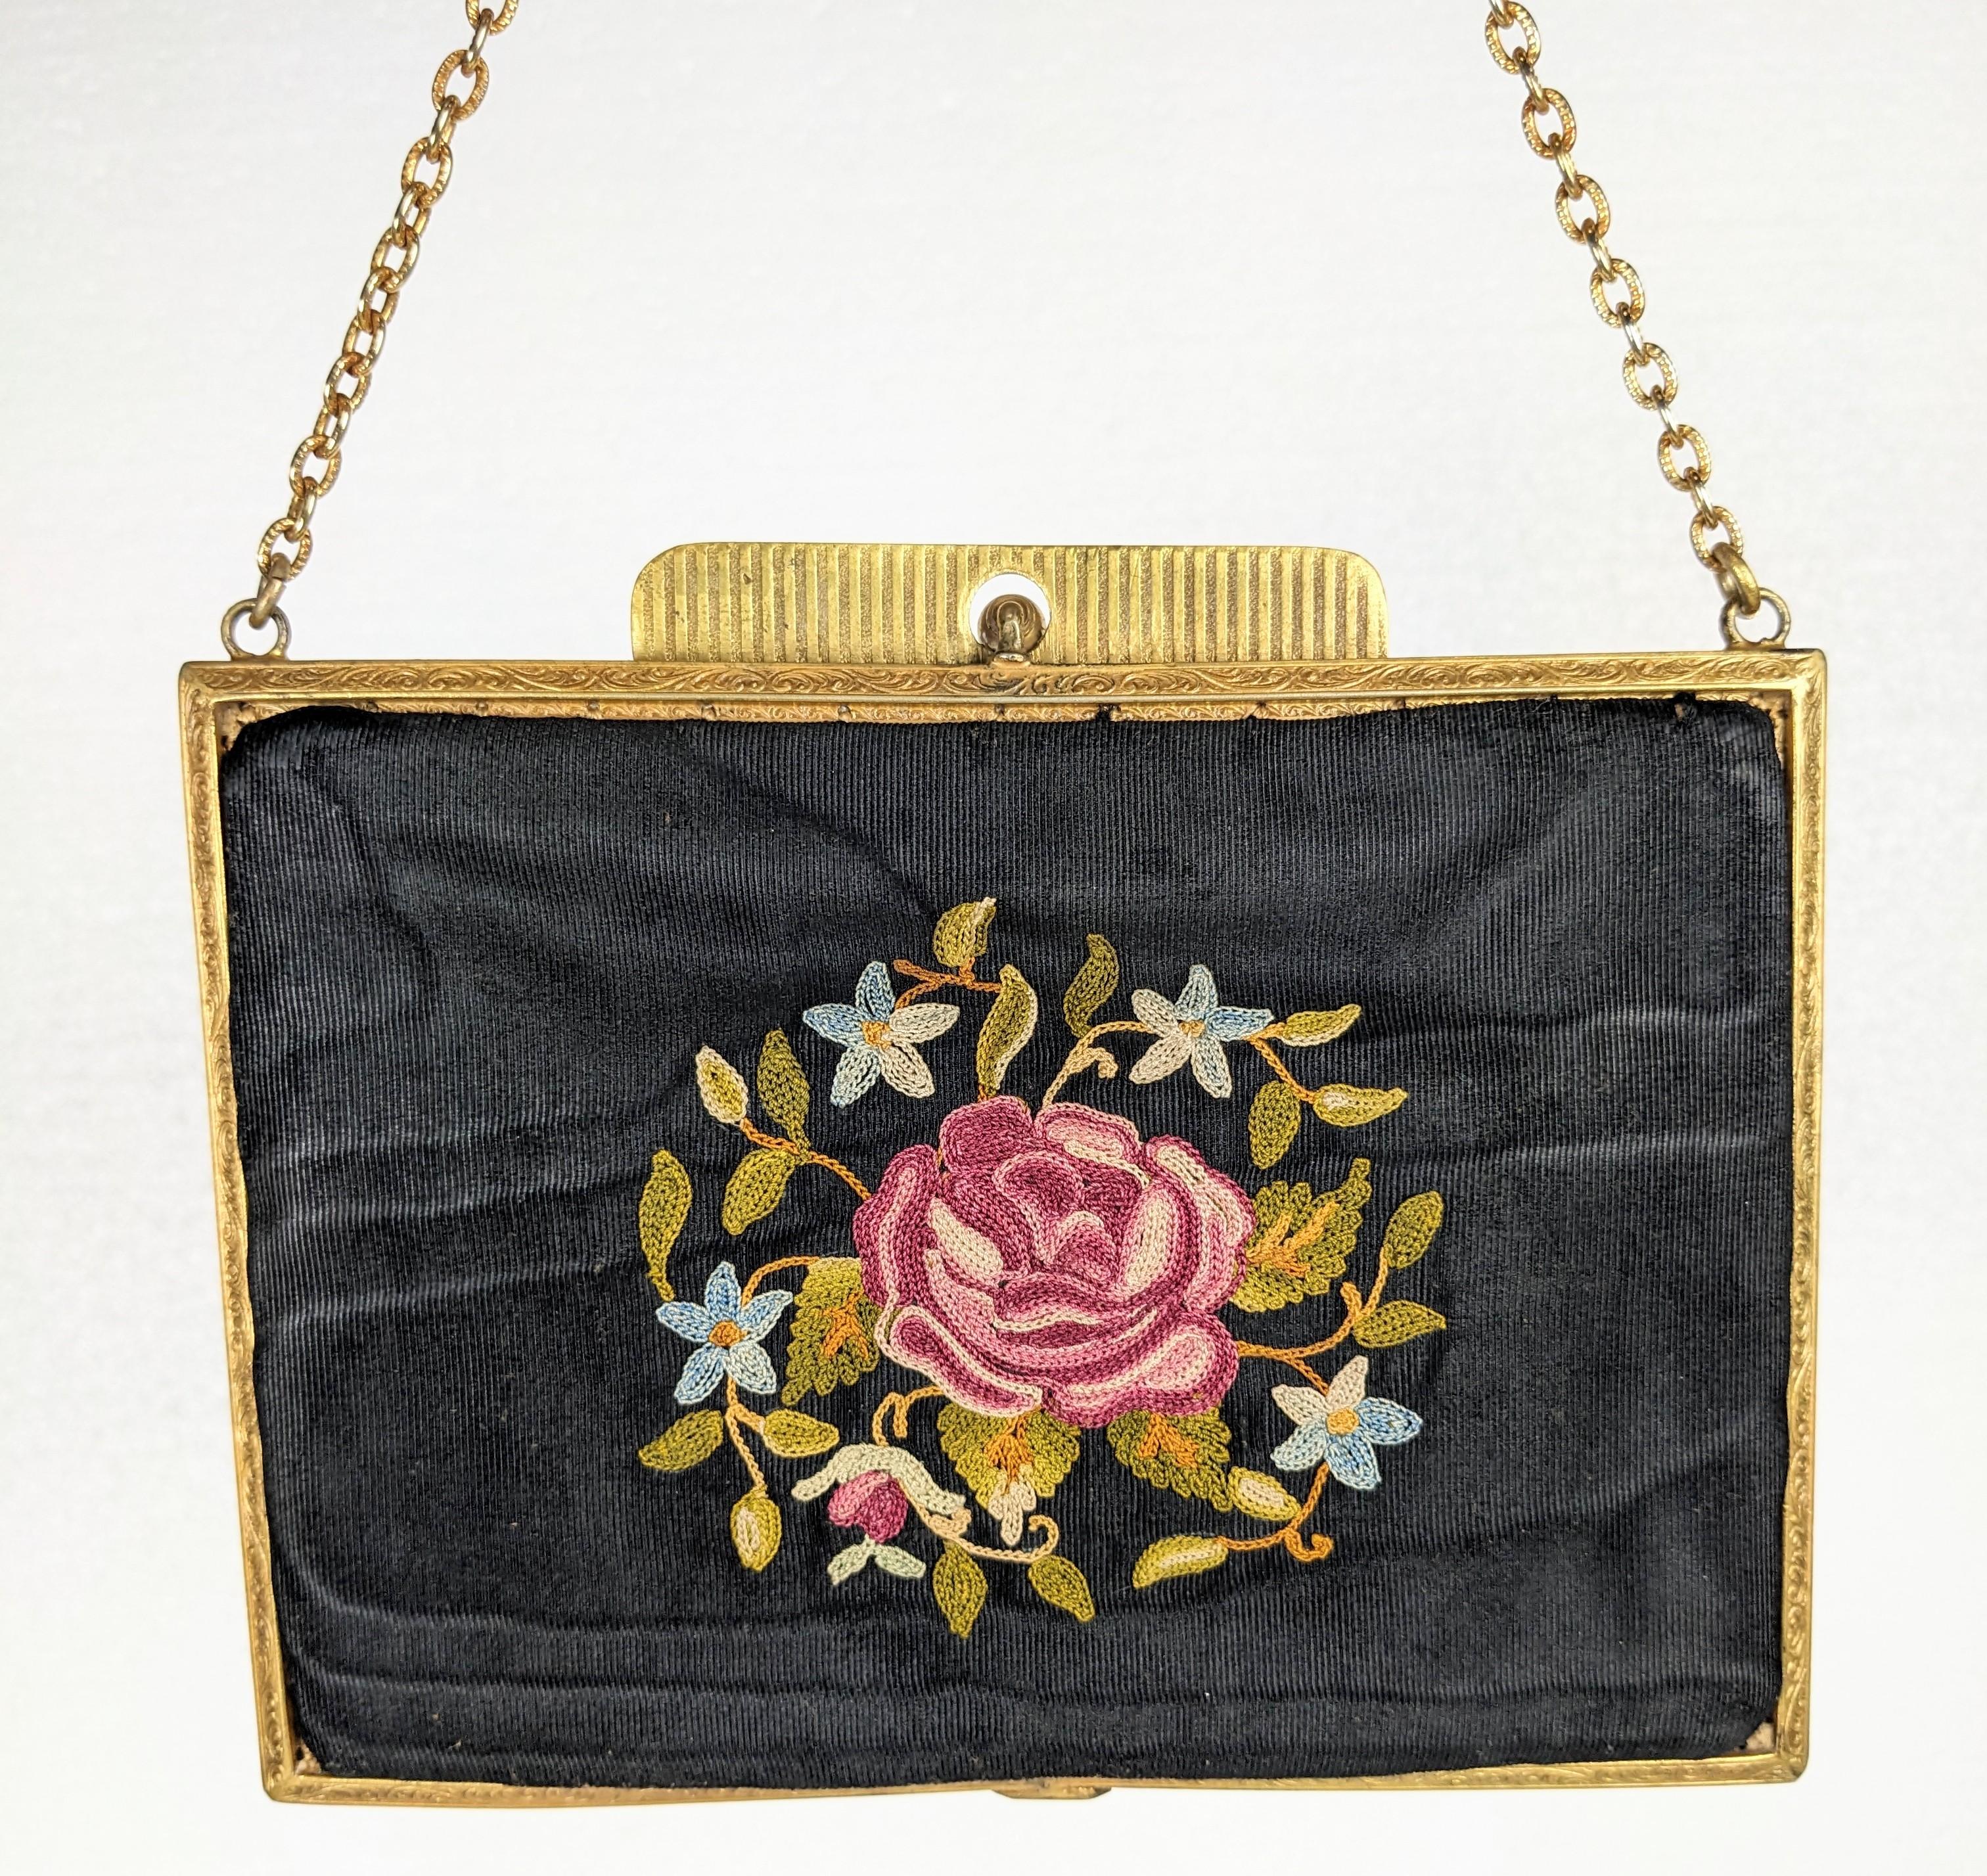  Edwardian Beauvais Embroidered Bag For Sale 1